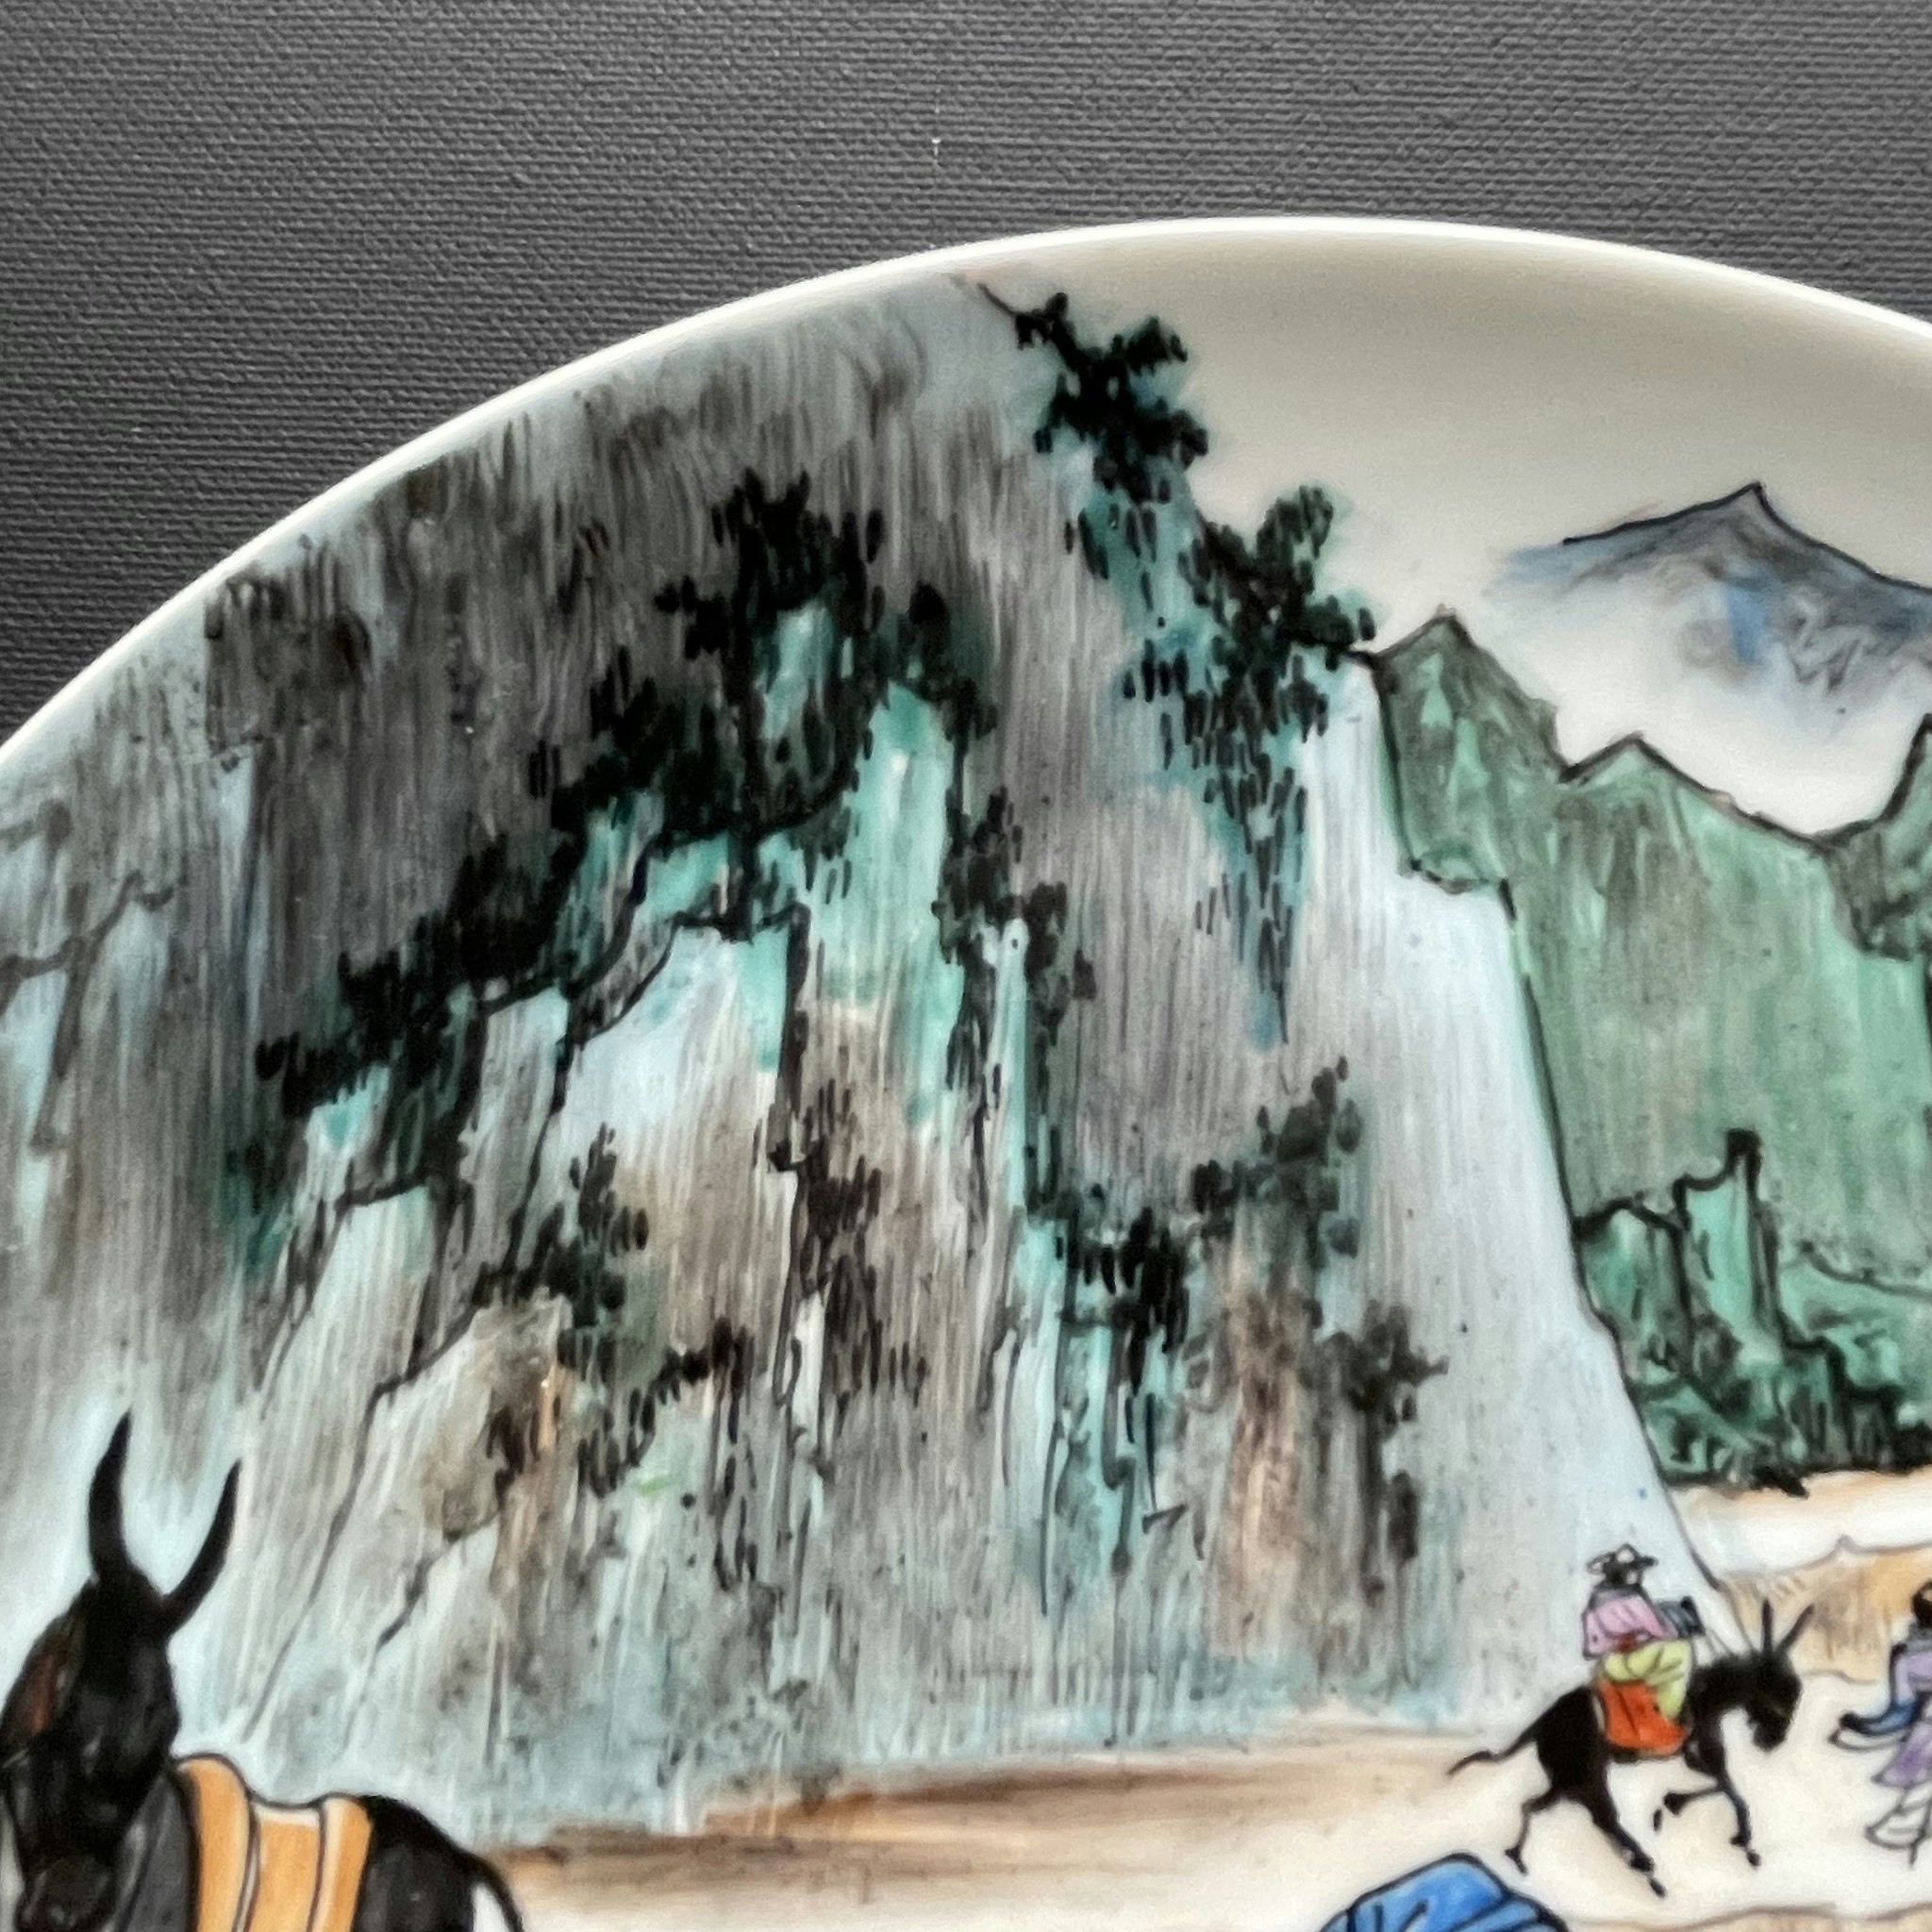 *Reserved for Tony* Vintage plate with bible motif from Tao Fong Shan 道风山 Hong Kong #1266